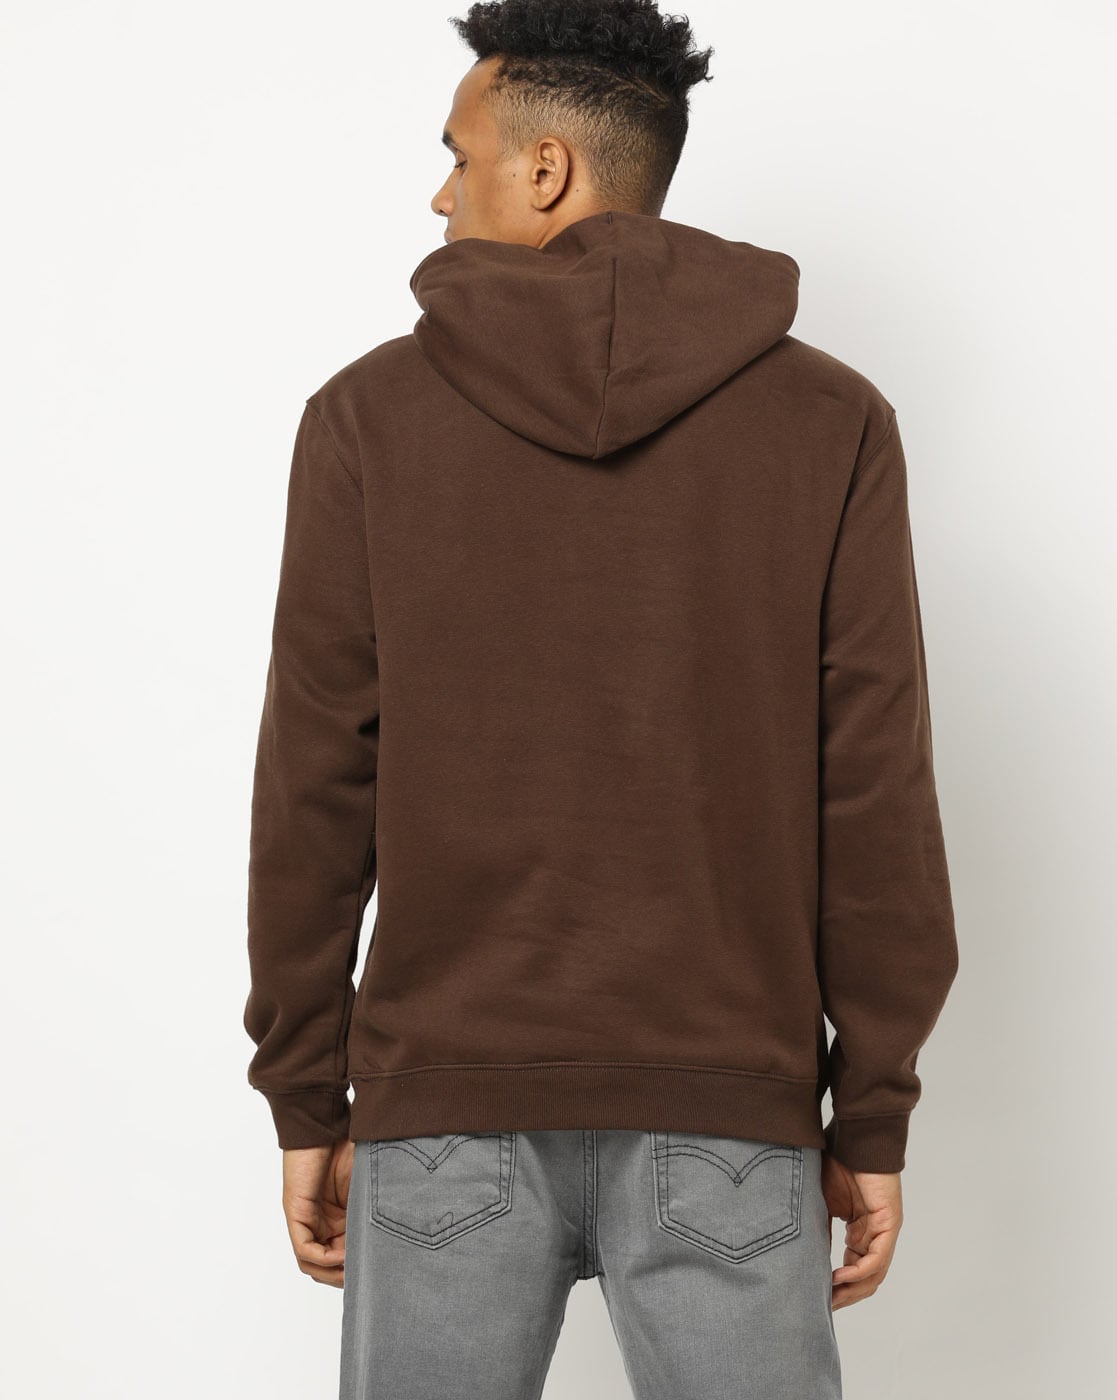 Brown Paisley All Over Fitted Hoodie - GBNY